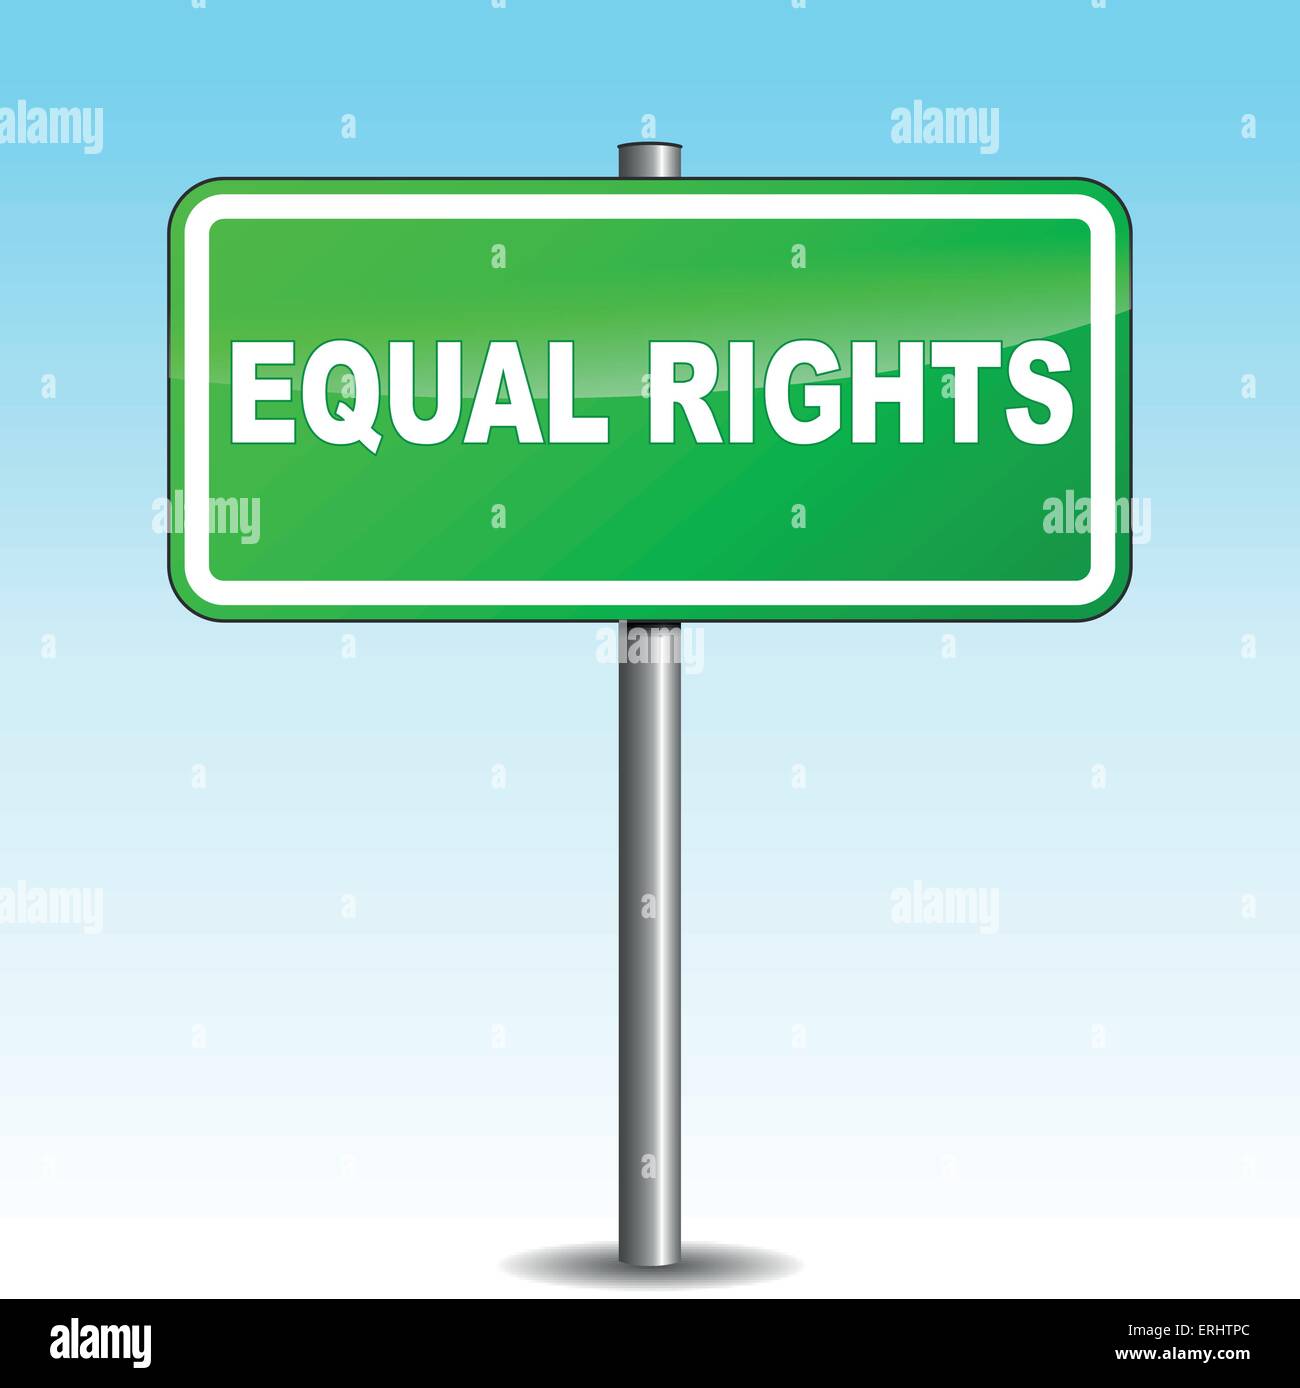 Vector illustration of equal rights signpost on sky background Stock Vector